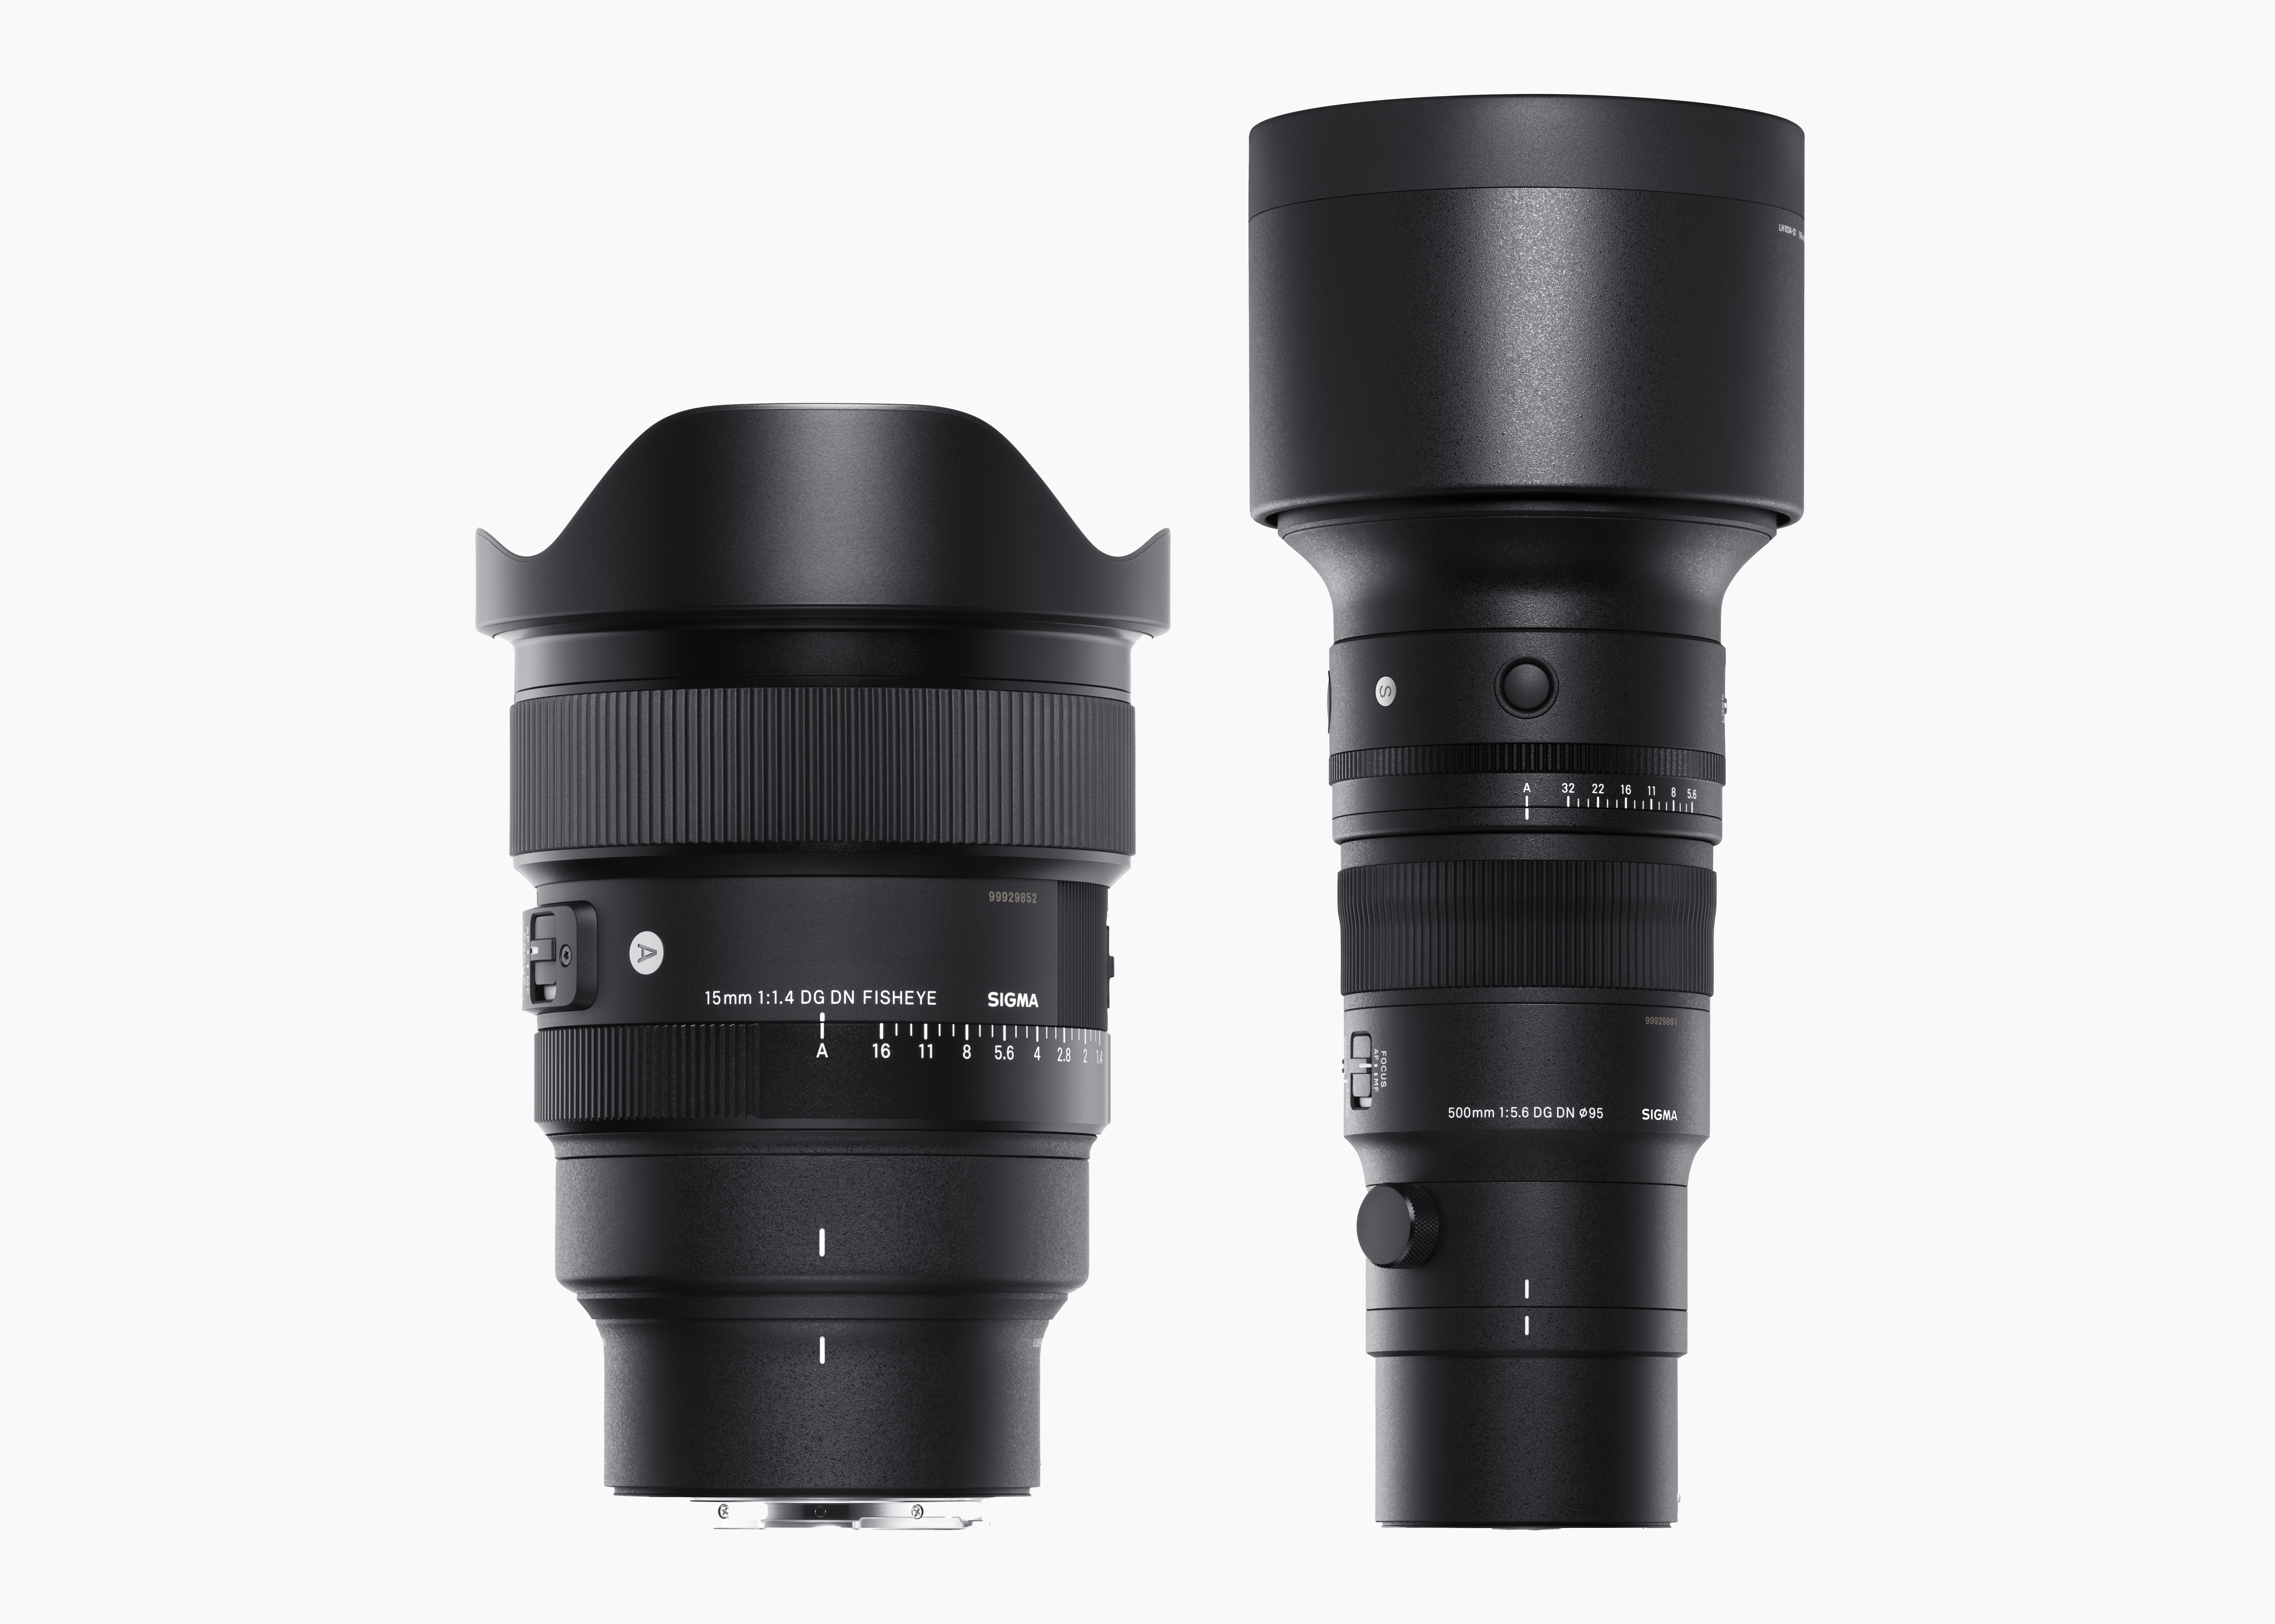 NEW SIGMA 15mm F1.4 DG DN and SIGMA 500mm F5.6 10